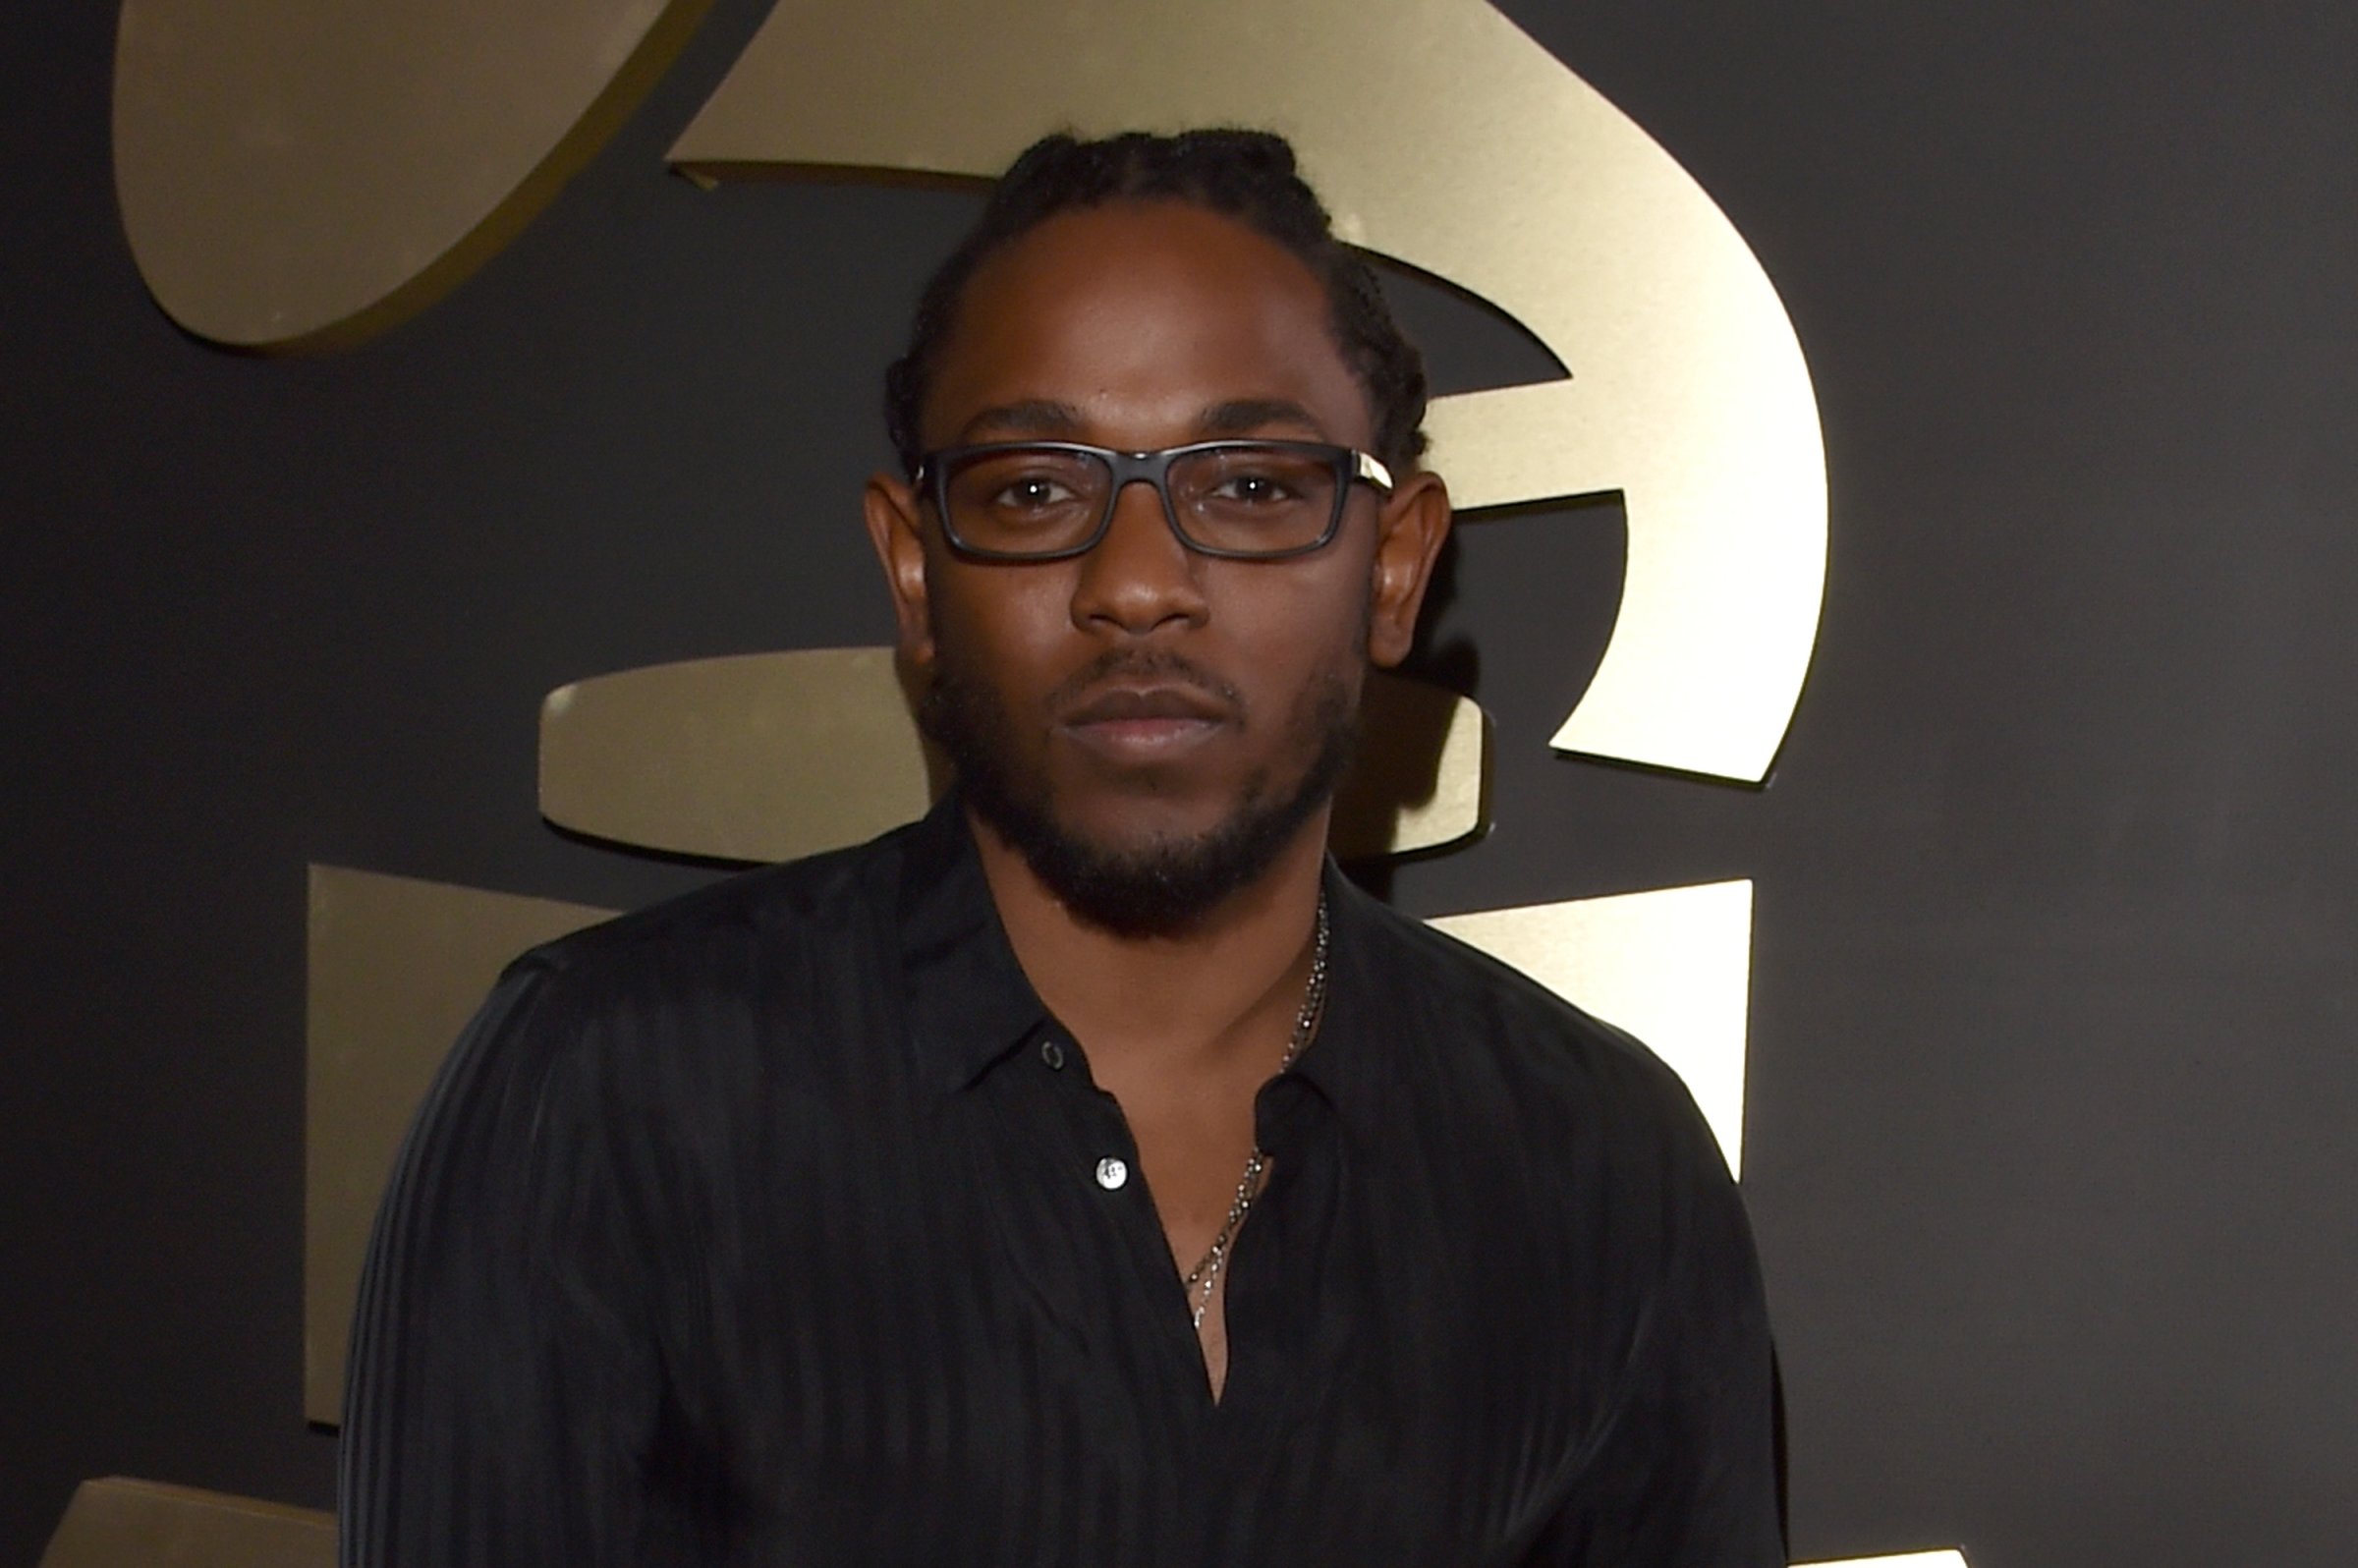 Recording artist Kendrick Lamar attends The 58th GRAMMY Awards at Staples Center on February 15, 2016 in Los Angeles, California